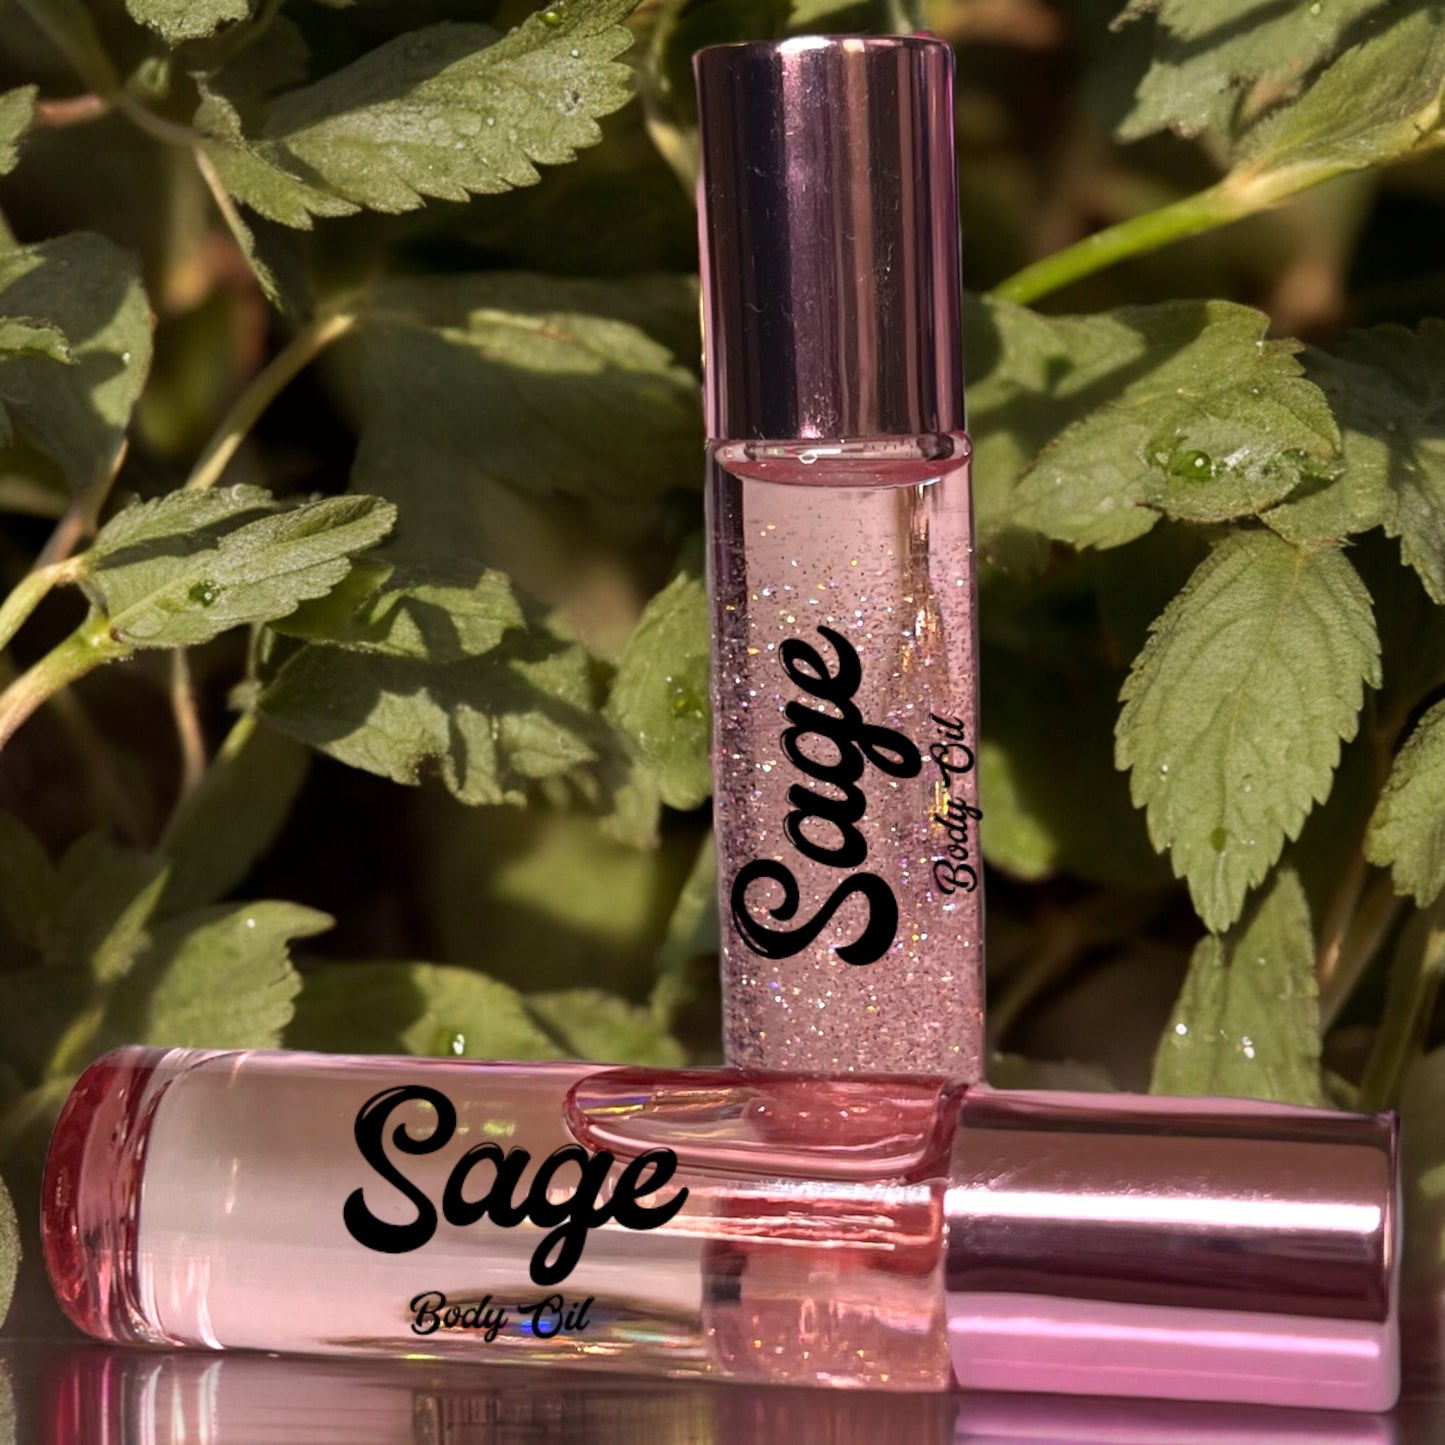 Sage Roll On Ball Body Oil 10ML Optional Infused Glitter